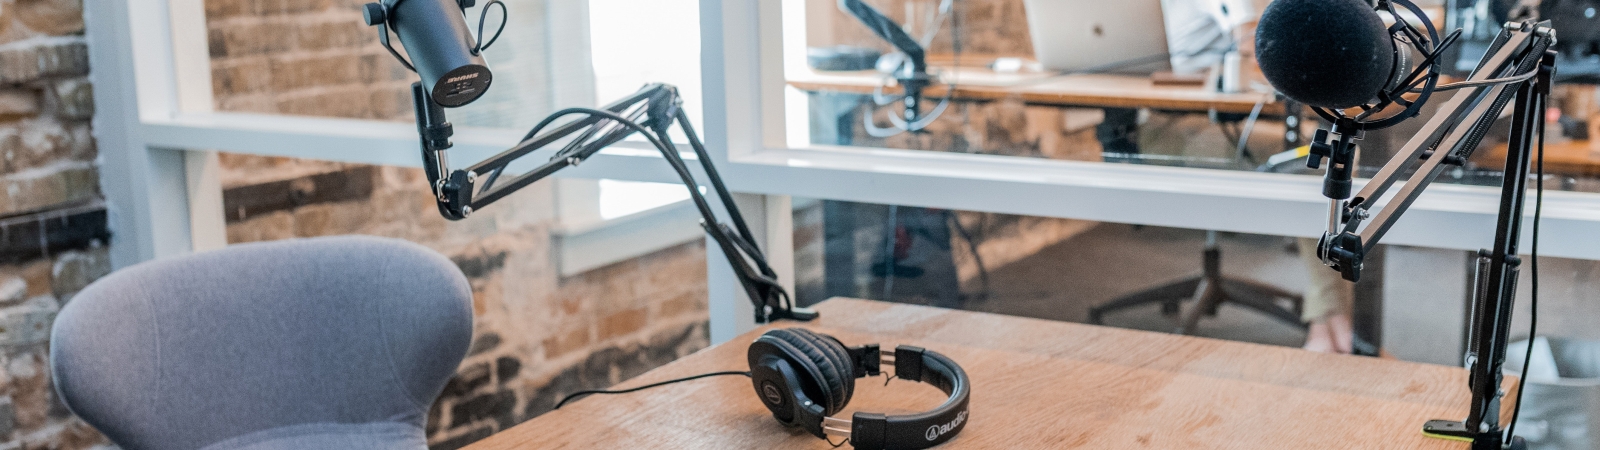 two sets of headphones and two recording microphones sit on a table